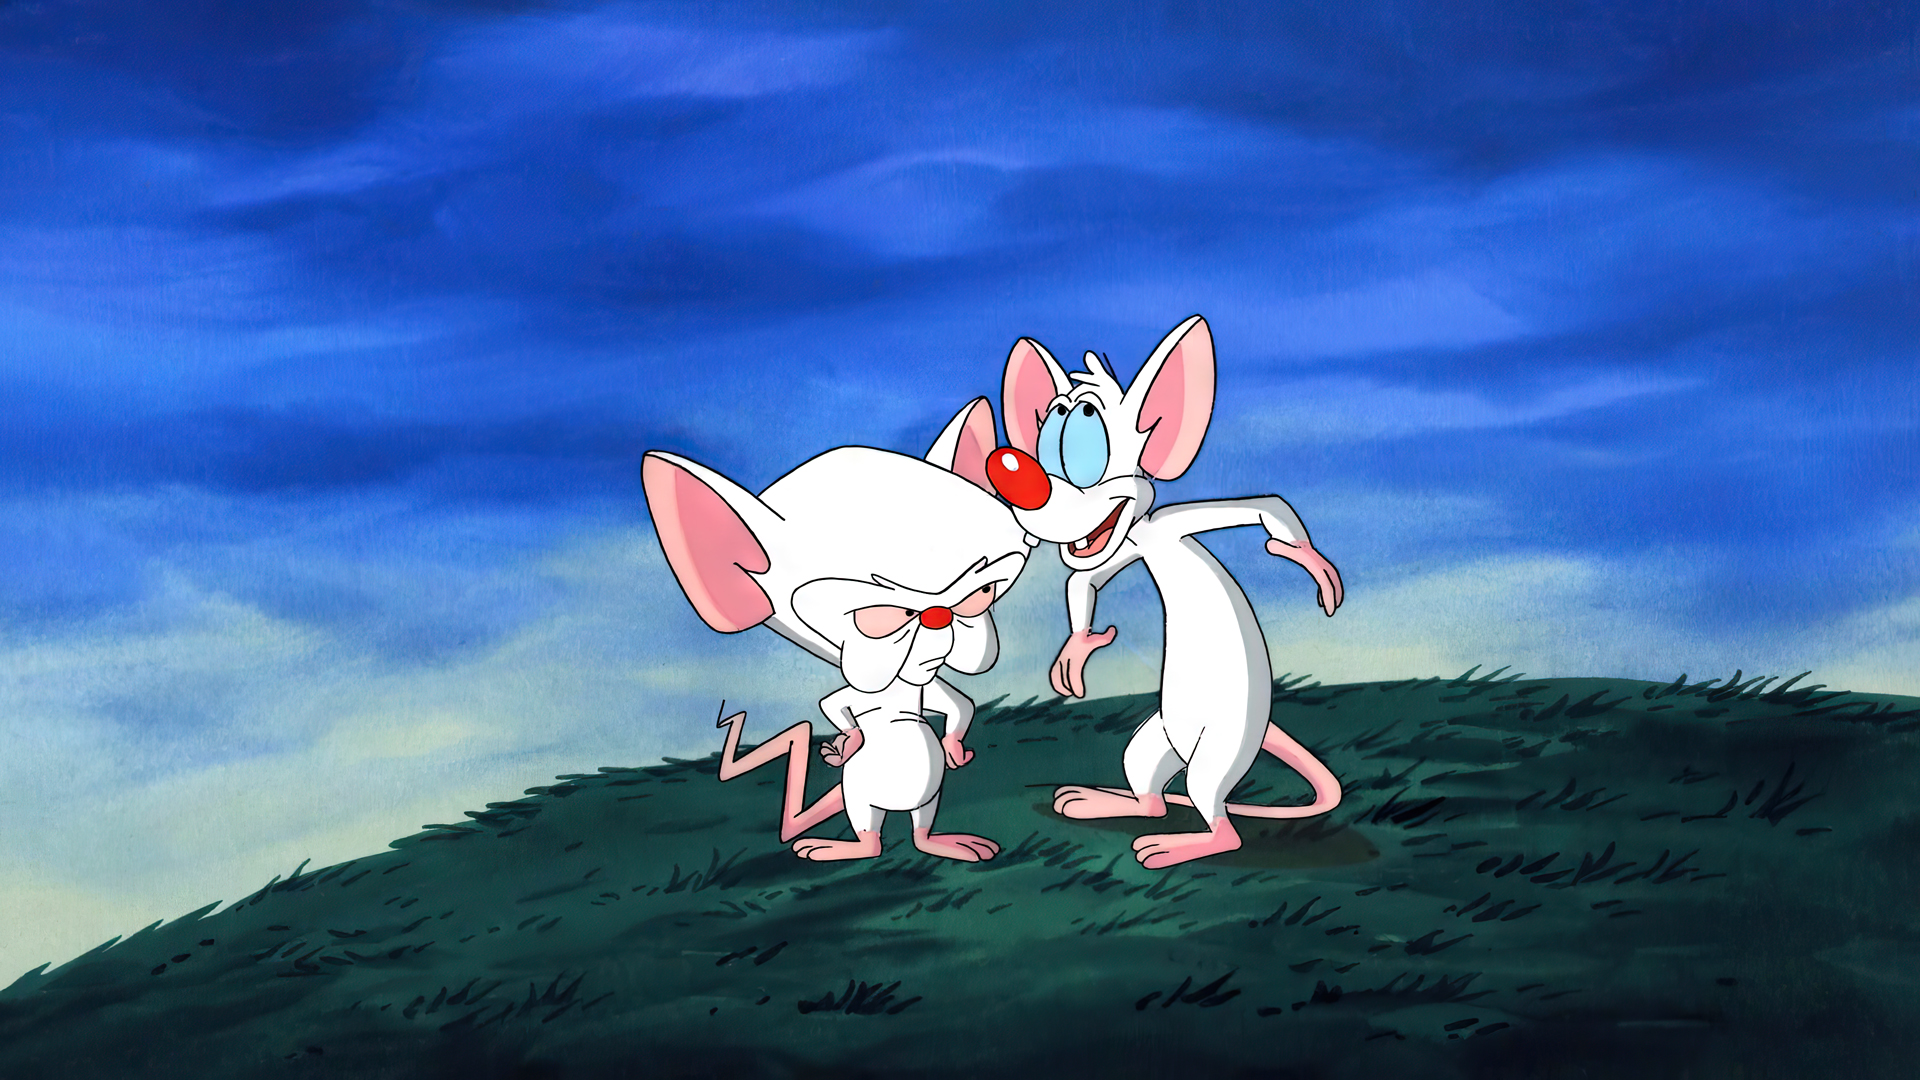 Pinky And The Brain Animation Cartoon Sky Grass Mouse Animal Production Cel Warner Brothers Screen S 1920x1080